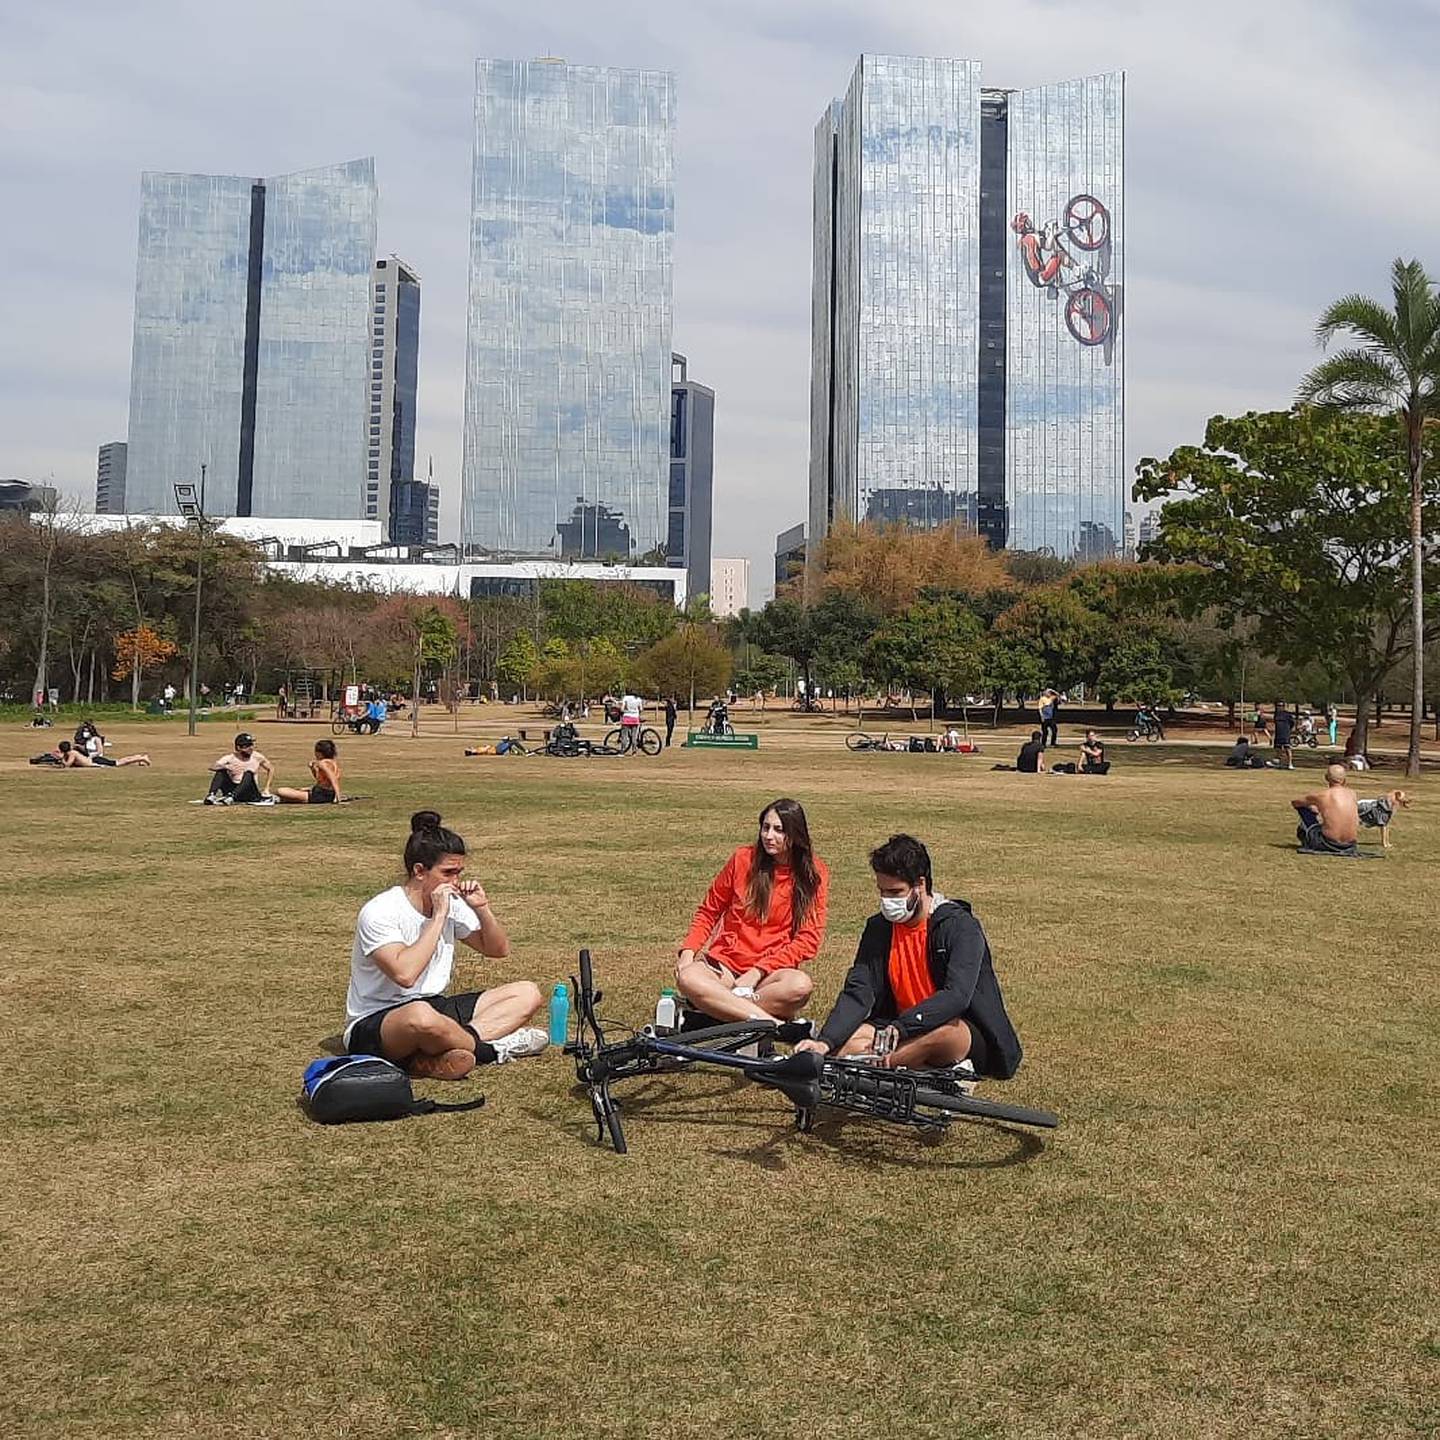 The Parque do Povo, in Chácara Itaim, is one of the main public spaces in the south zone to exercise, rest and enjoy sunny days with friends and family.dfd